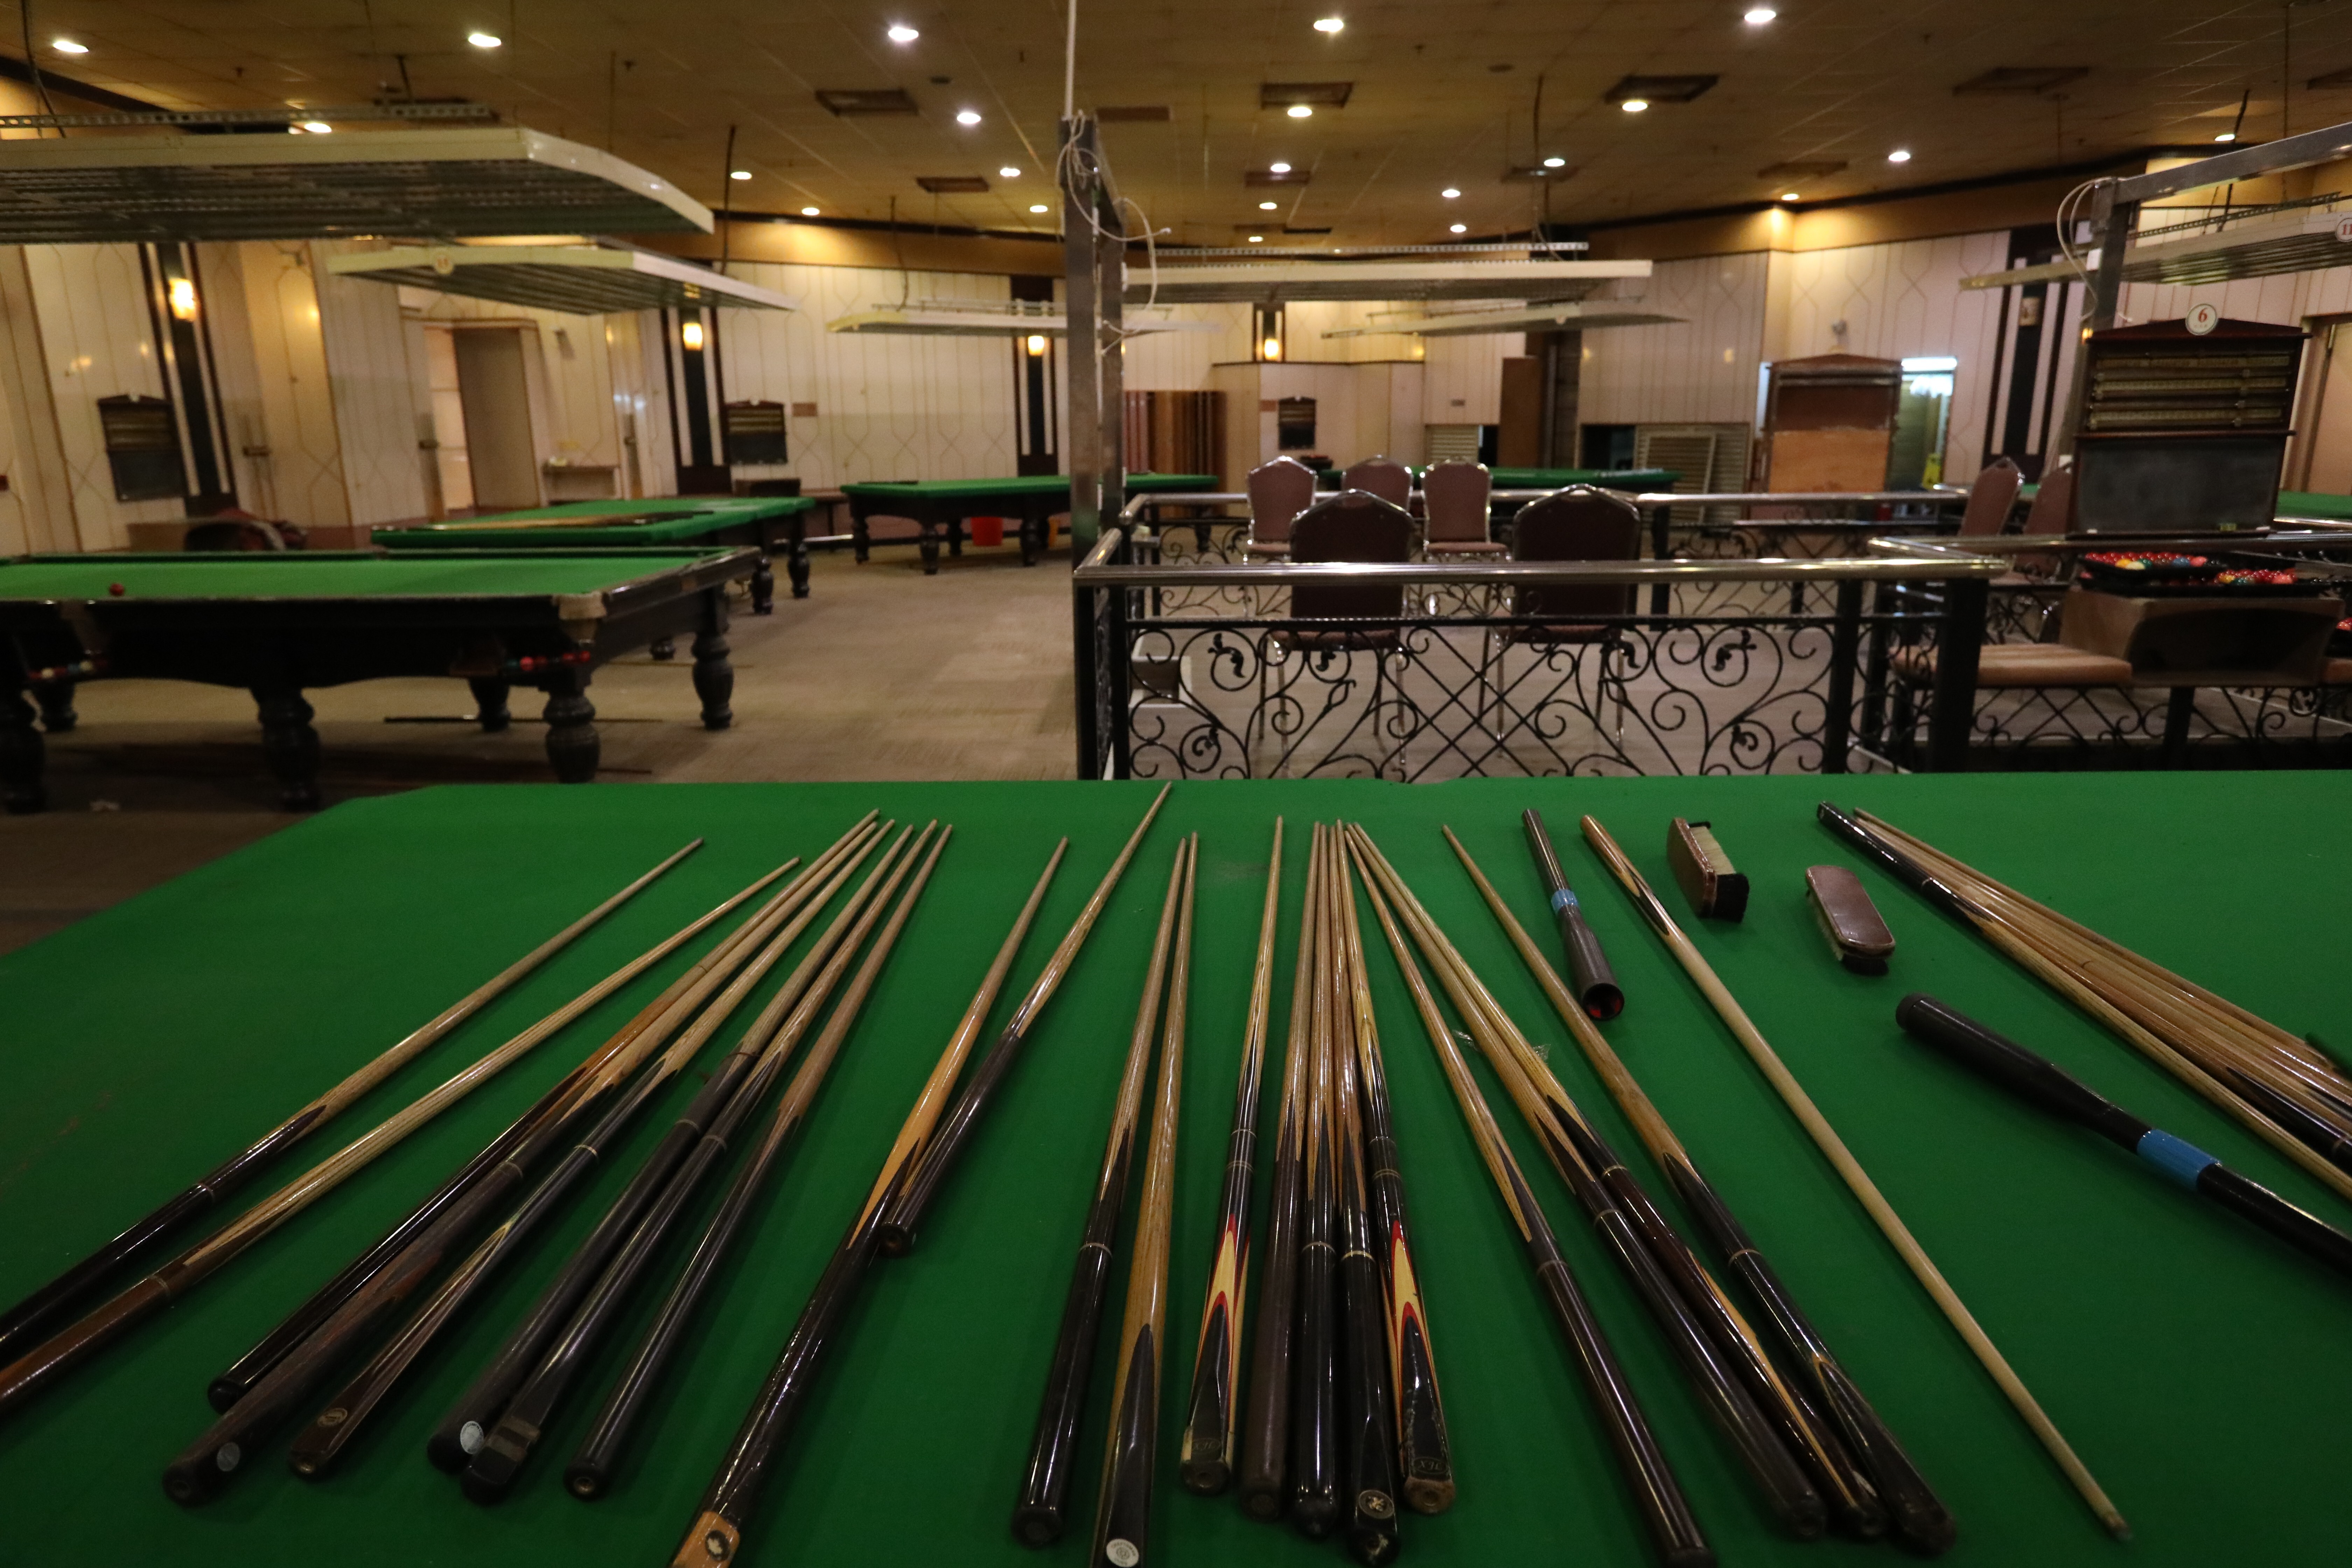 A snooker club is closed amid the pandemic at State Theatre in North Point. Photo: Nora Tam